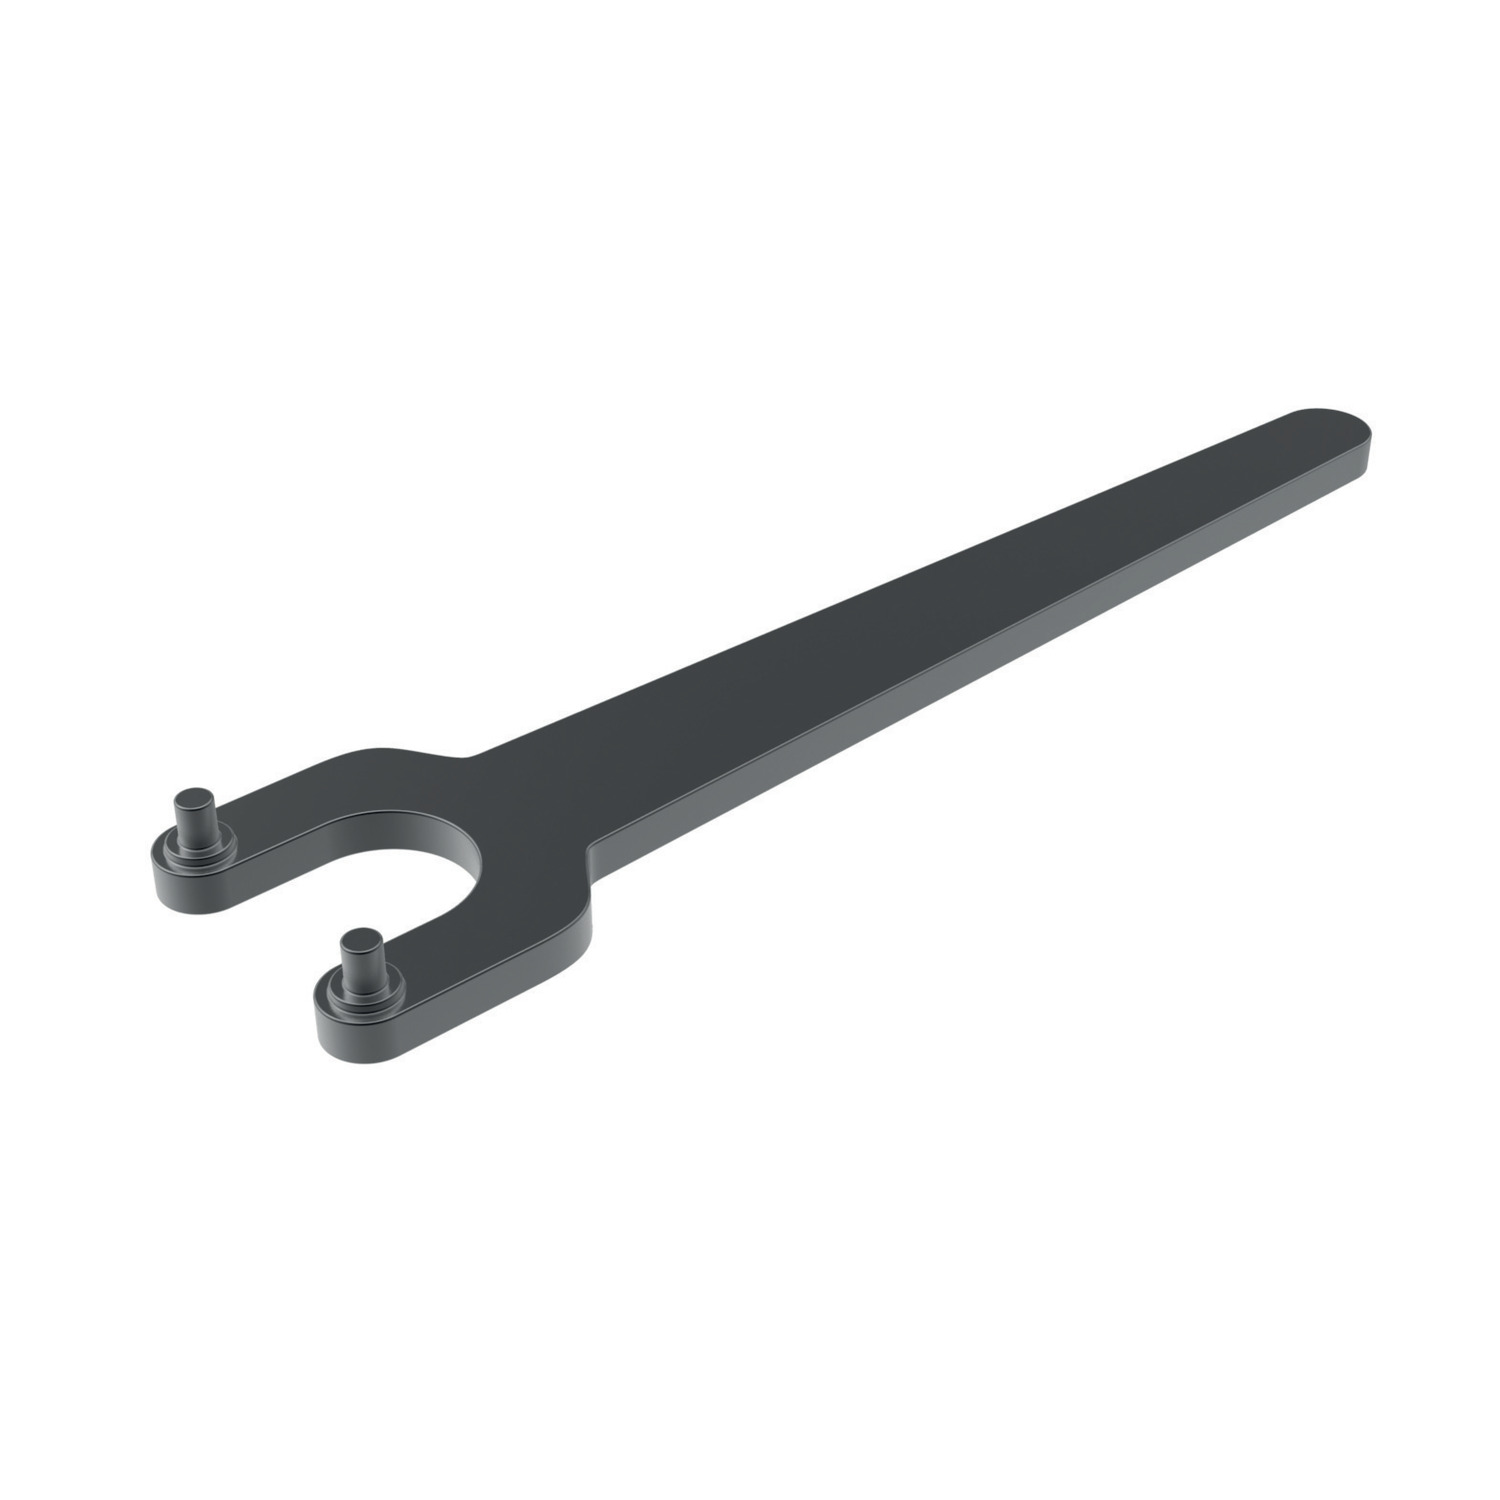 95340 - Face Spanner - with Pins